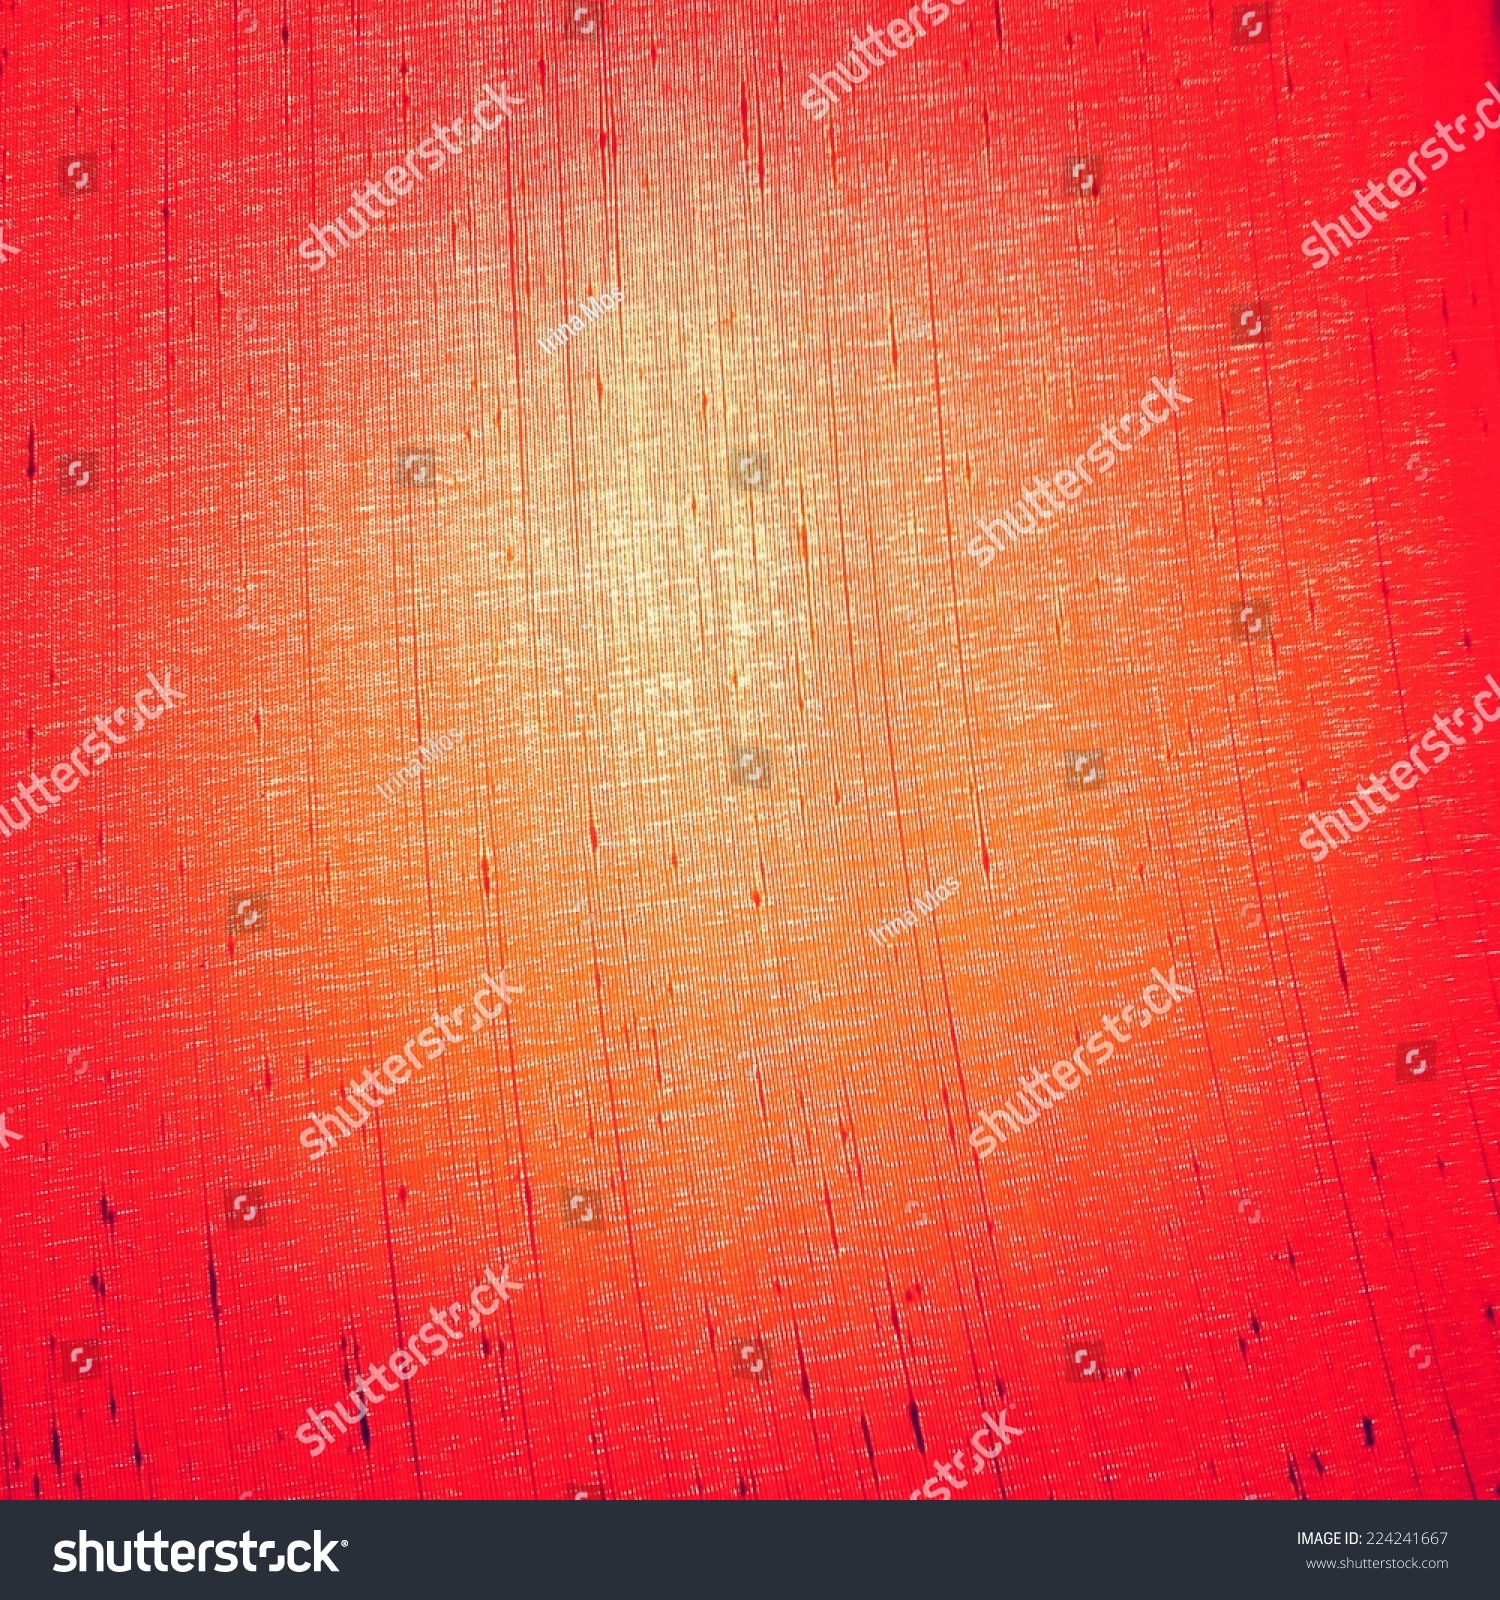 Abstract Red Yellow Fabric Texture Background Stock Photo 224241667 ...